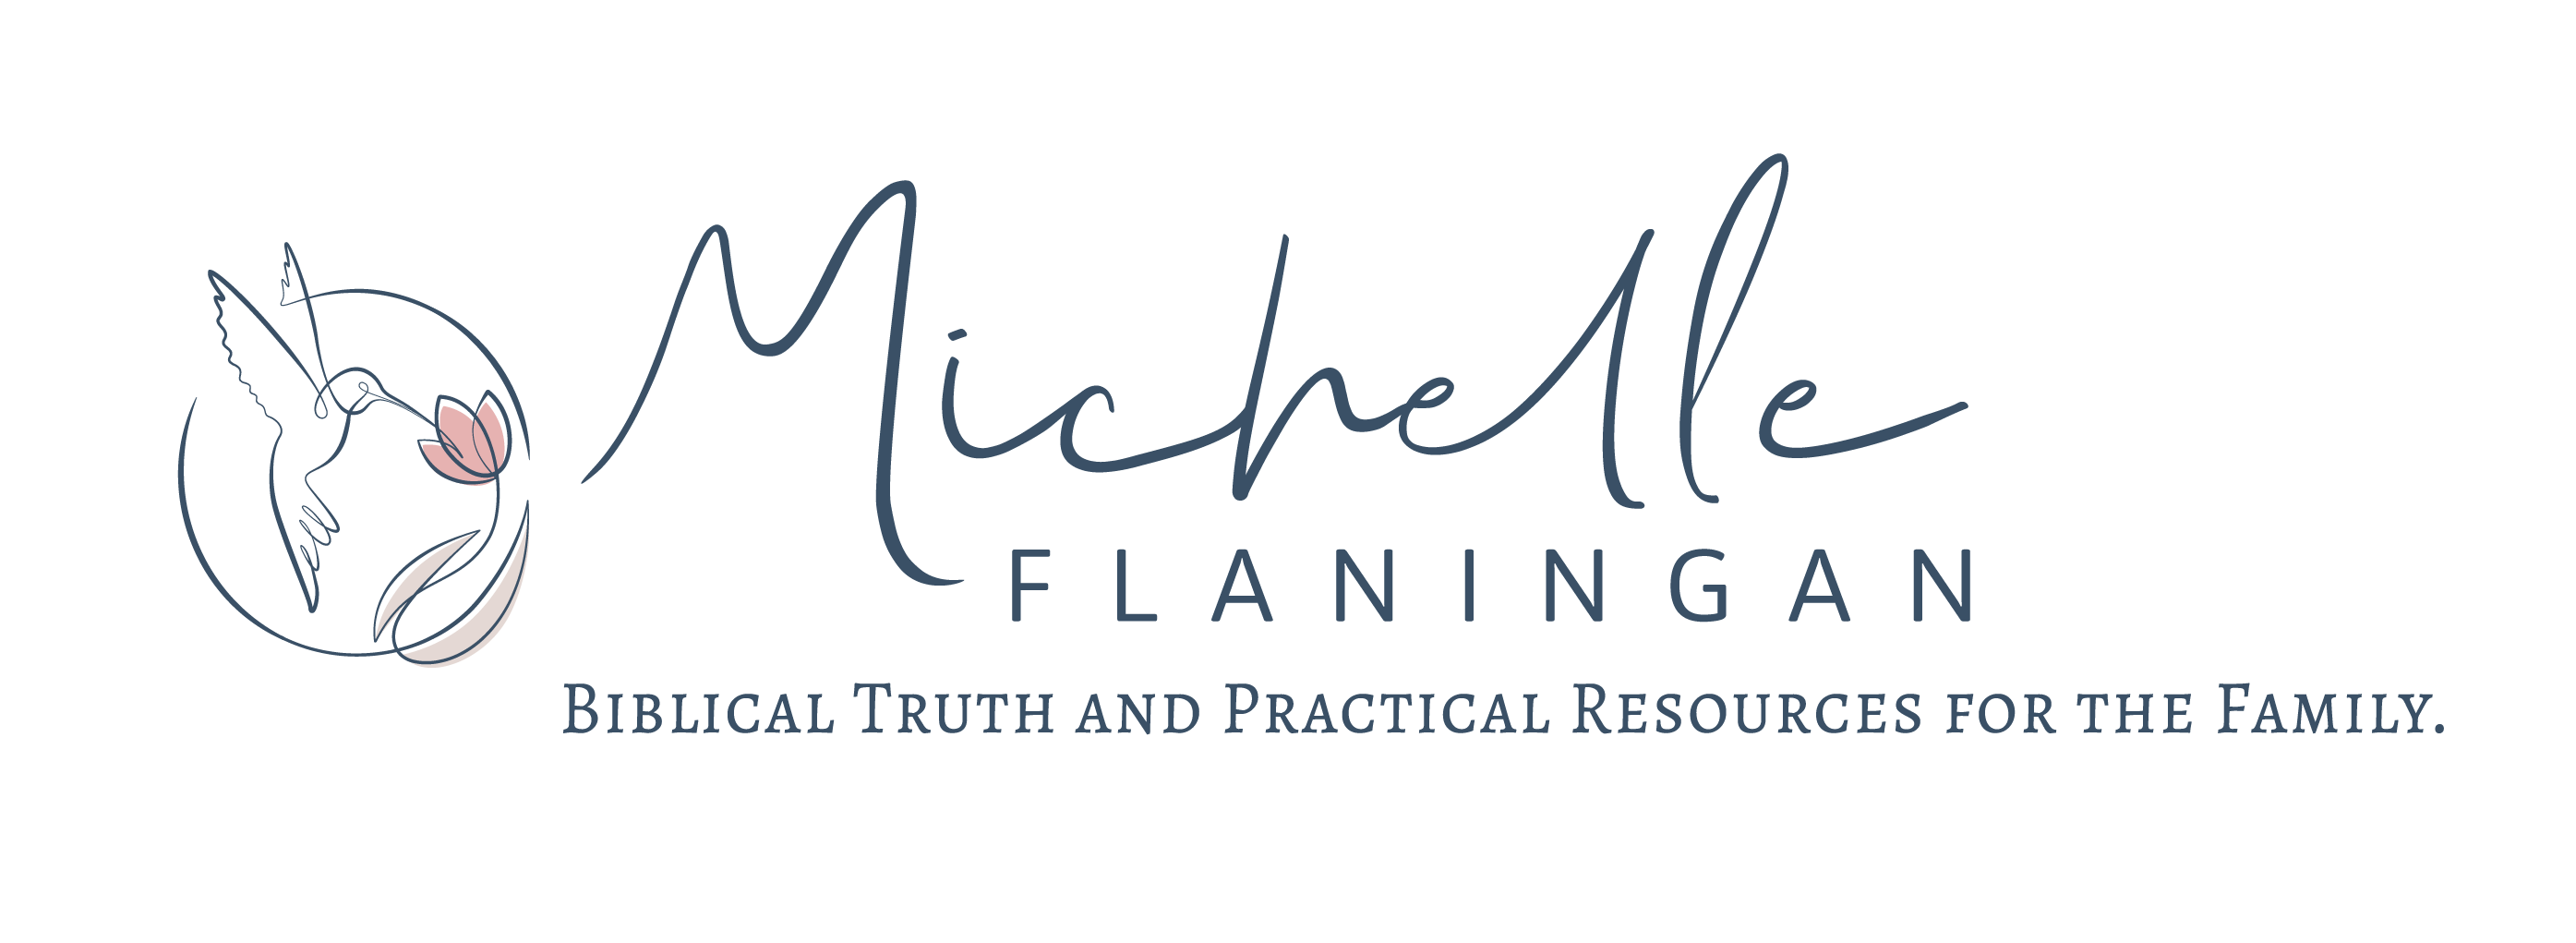 Michelle Flaningan - Biblical Truth and Practical Resources for the Family